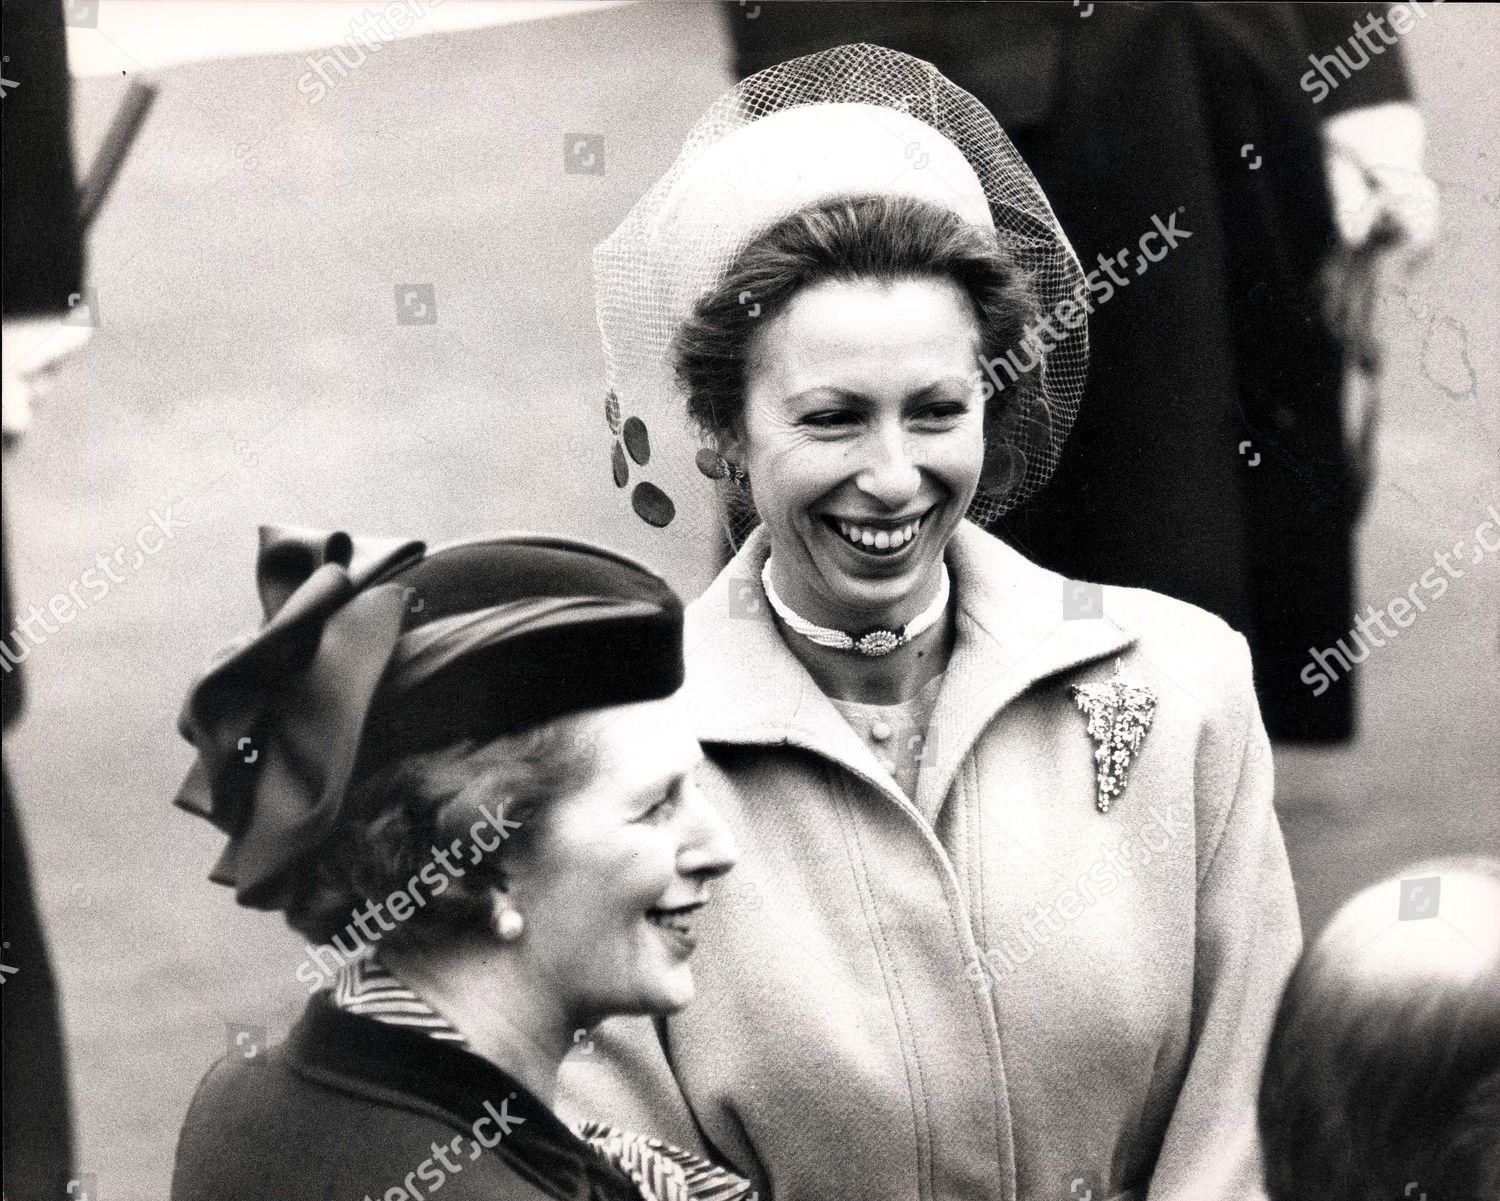 princess-anne-the-princess-royal-16-november-1982-princess-anne-and-former-prime-minister-baroness-margaret-thatcher-share-a-joke-on-westminster-pier-royalty-shutterstock-editorial-1084766a.jpg